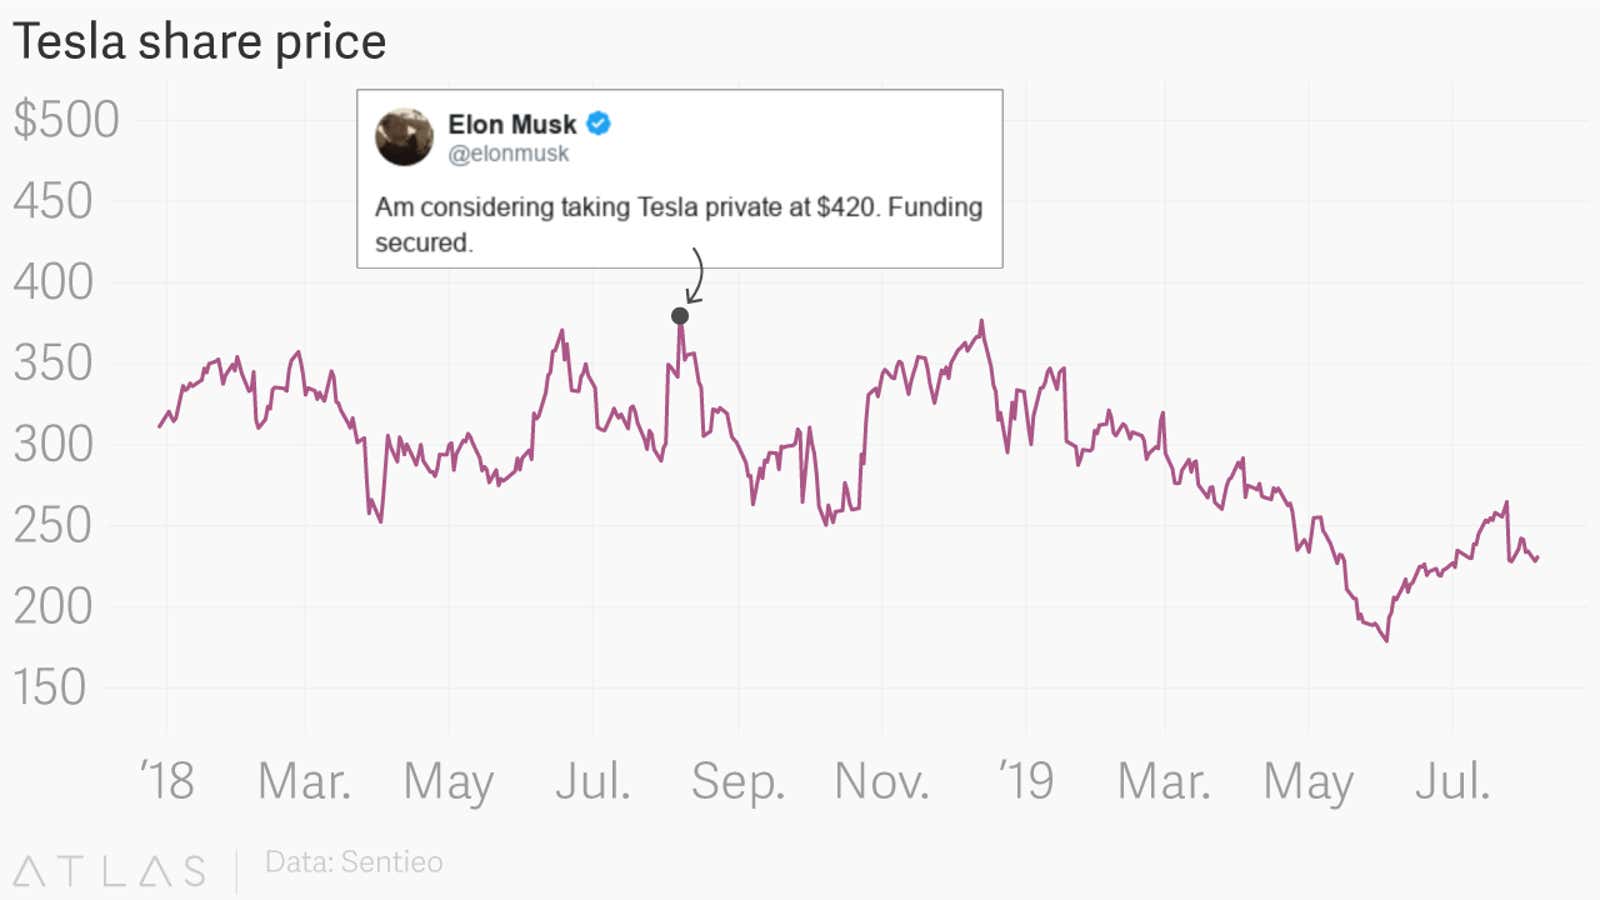 A year ago today, Elon Musk sent a very expensive tweet